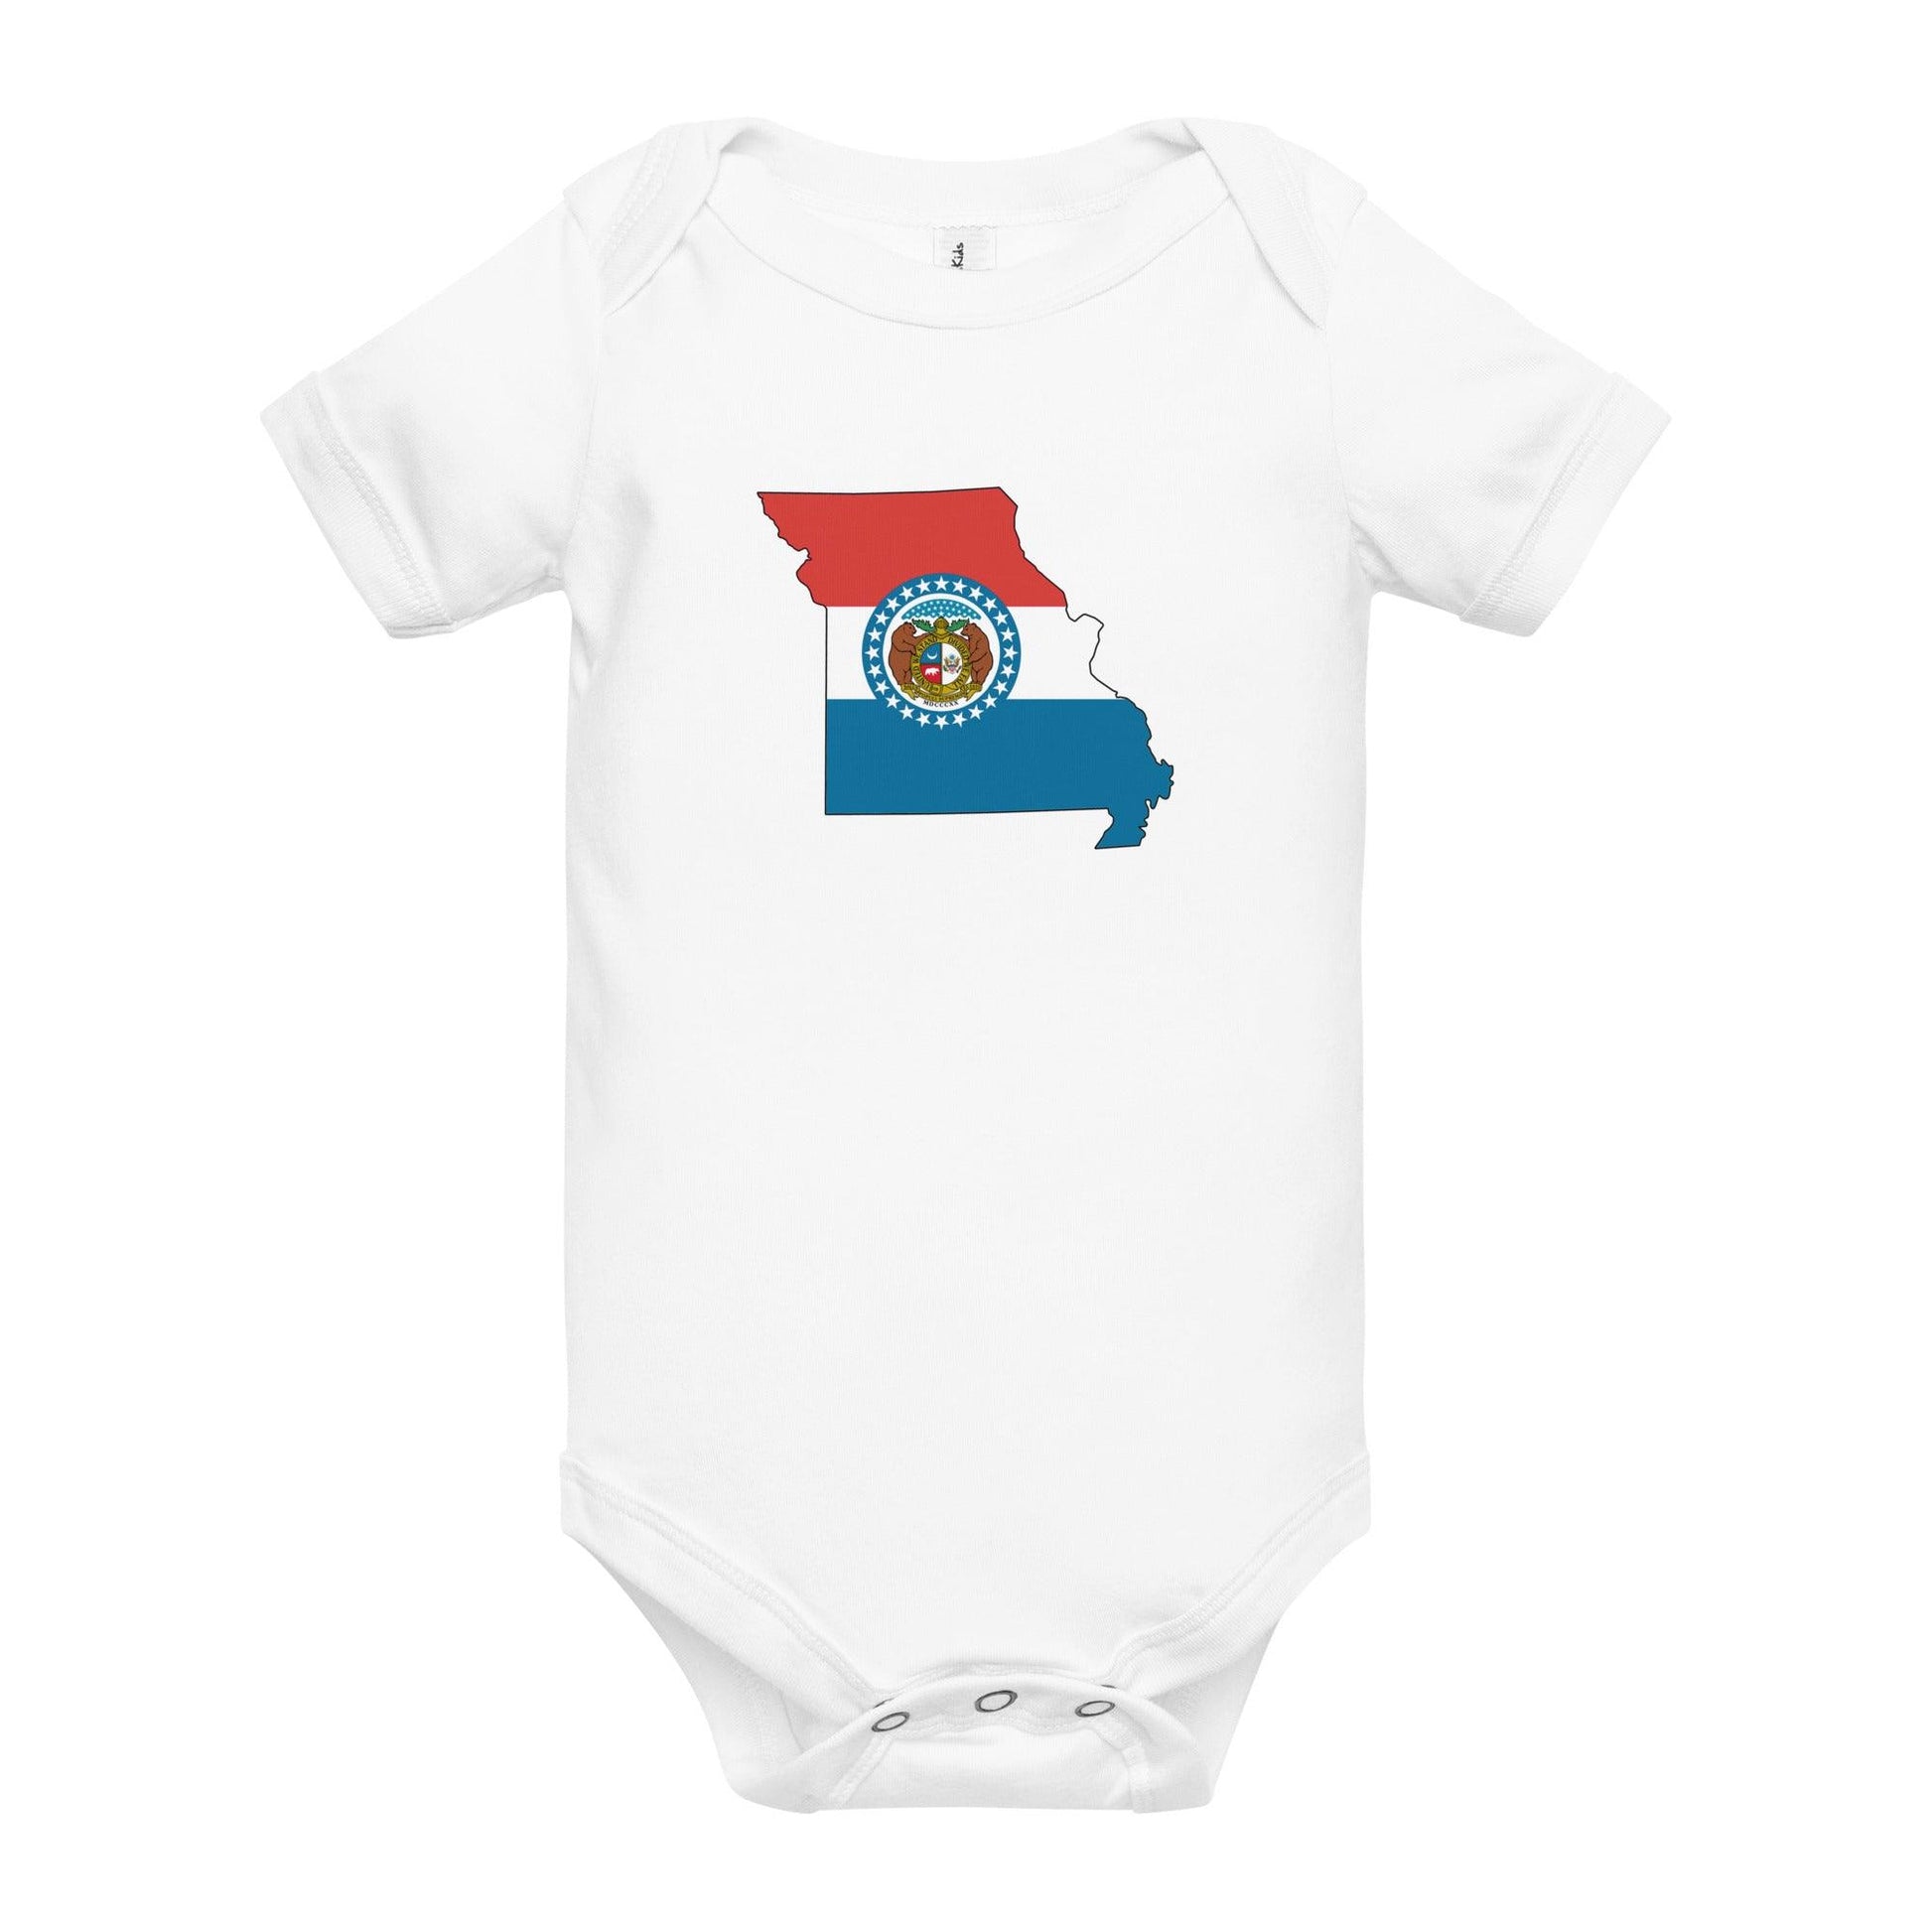 Baby onesie with the Missouri state flag design, featuring red, white, and blue colors with the state seal.